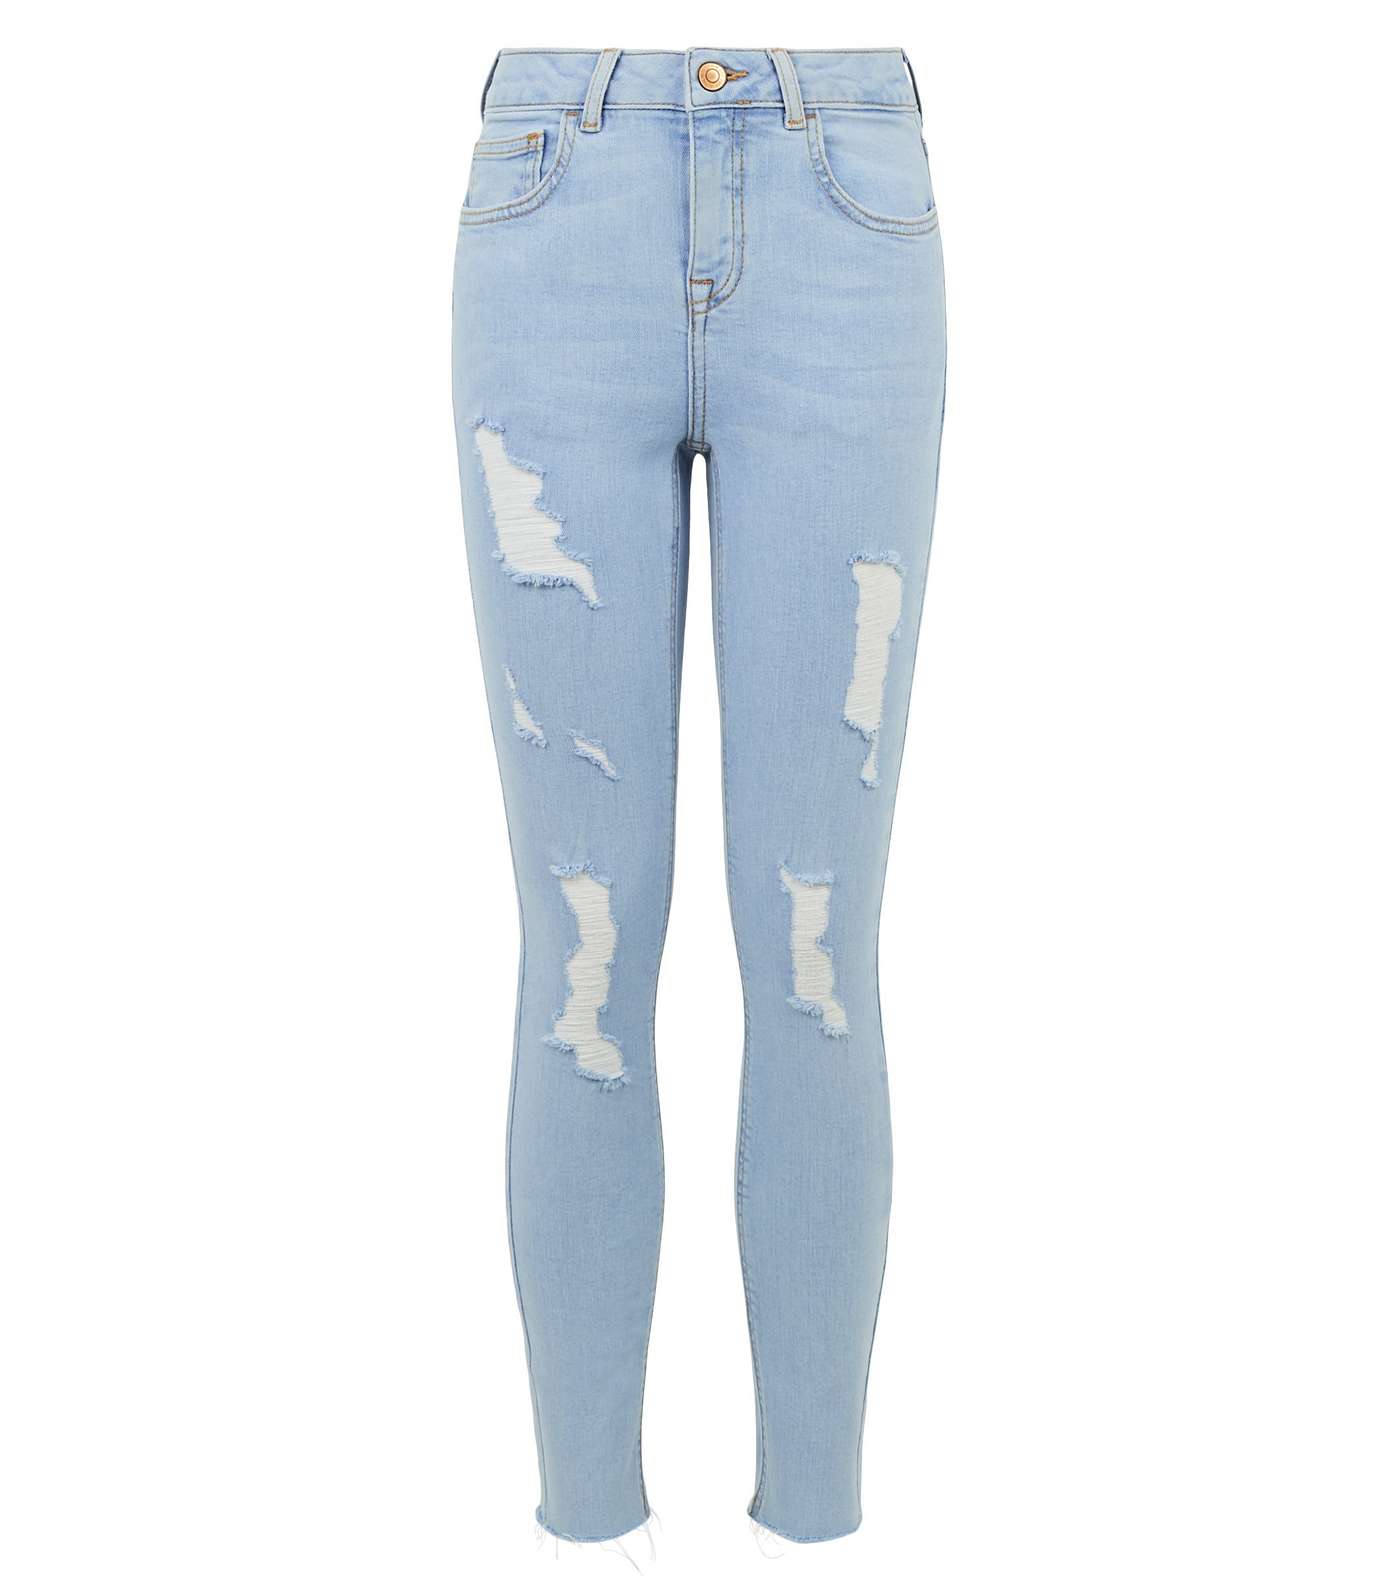 Girls Pale Blue Ripped Skinny Jeans Image 4